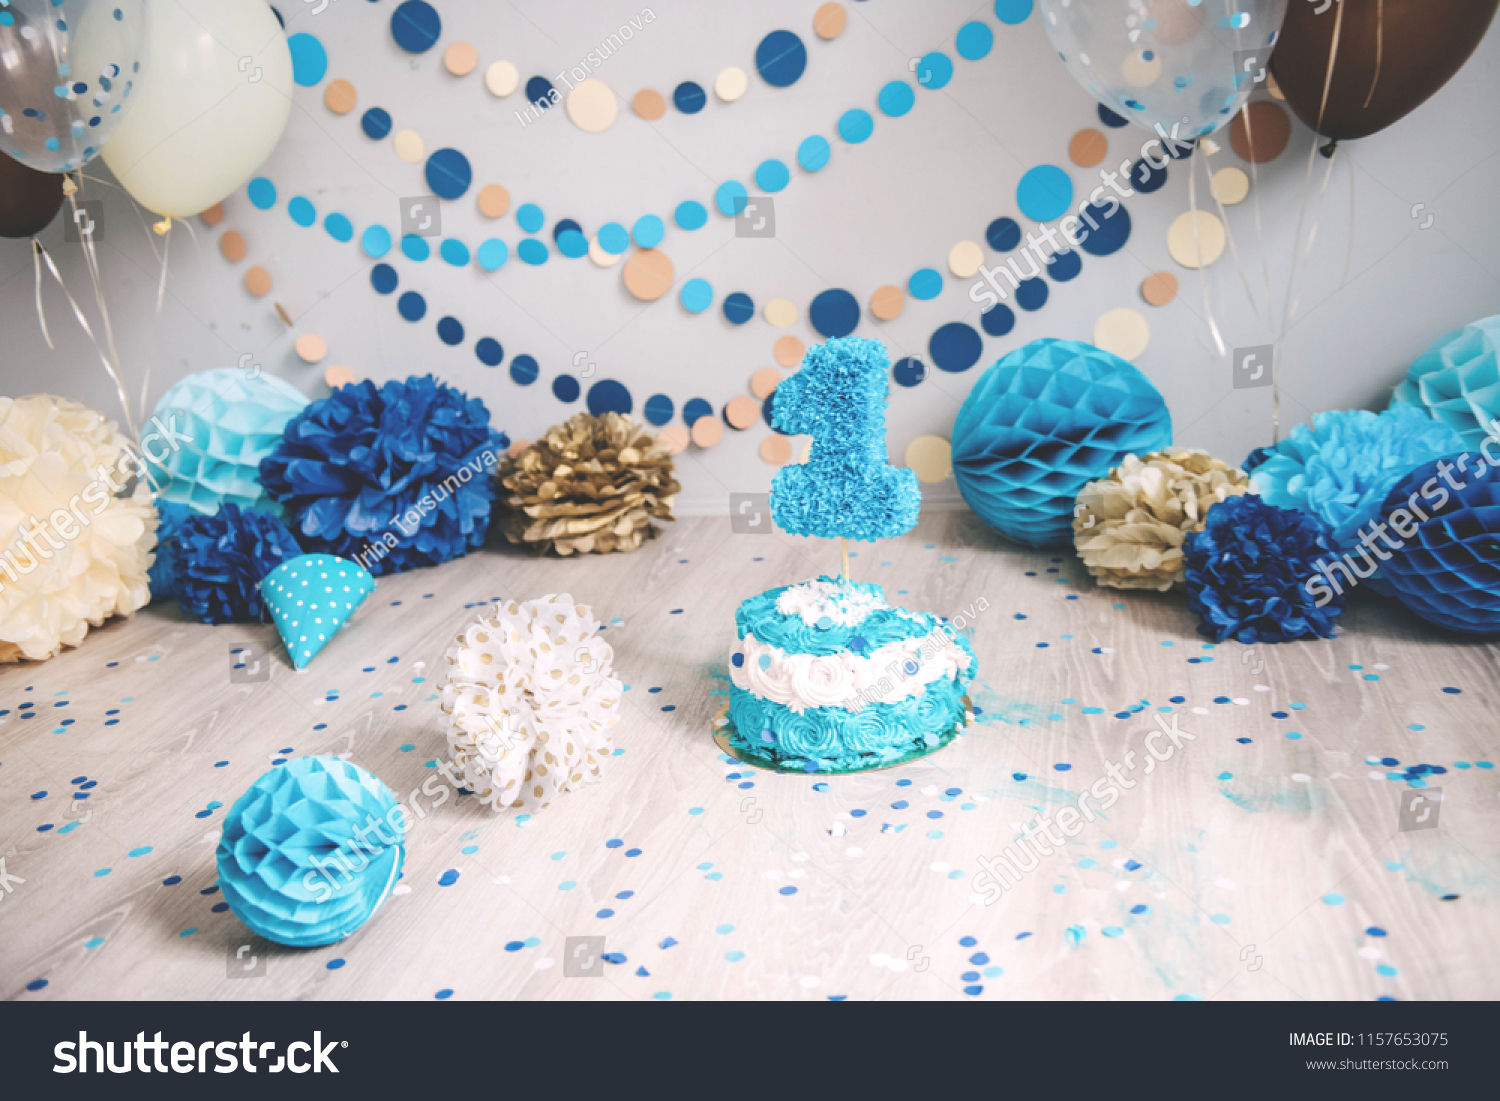 Fake Cake for Photo Shoots Birthday Party Decor Smash Cake Prop First Birthday Home Decor Blue Ombre Ruffle Cake